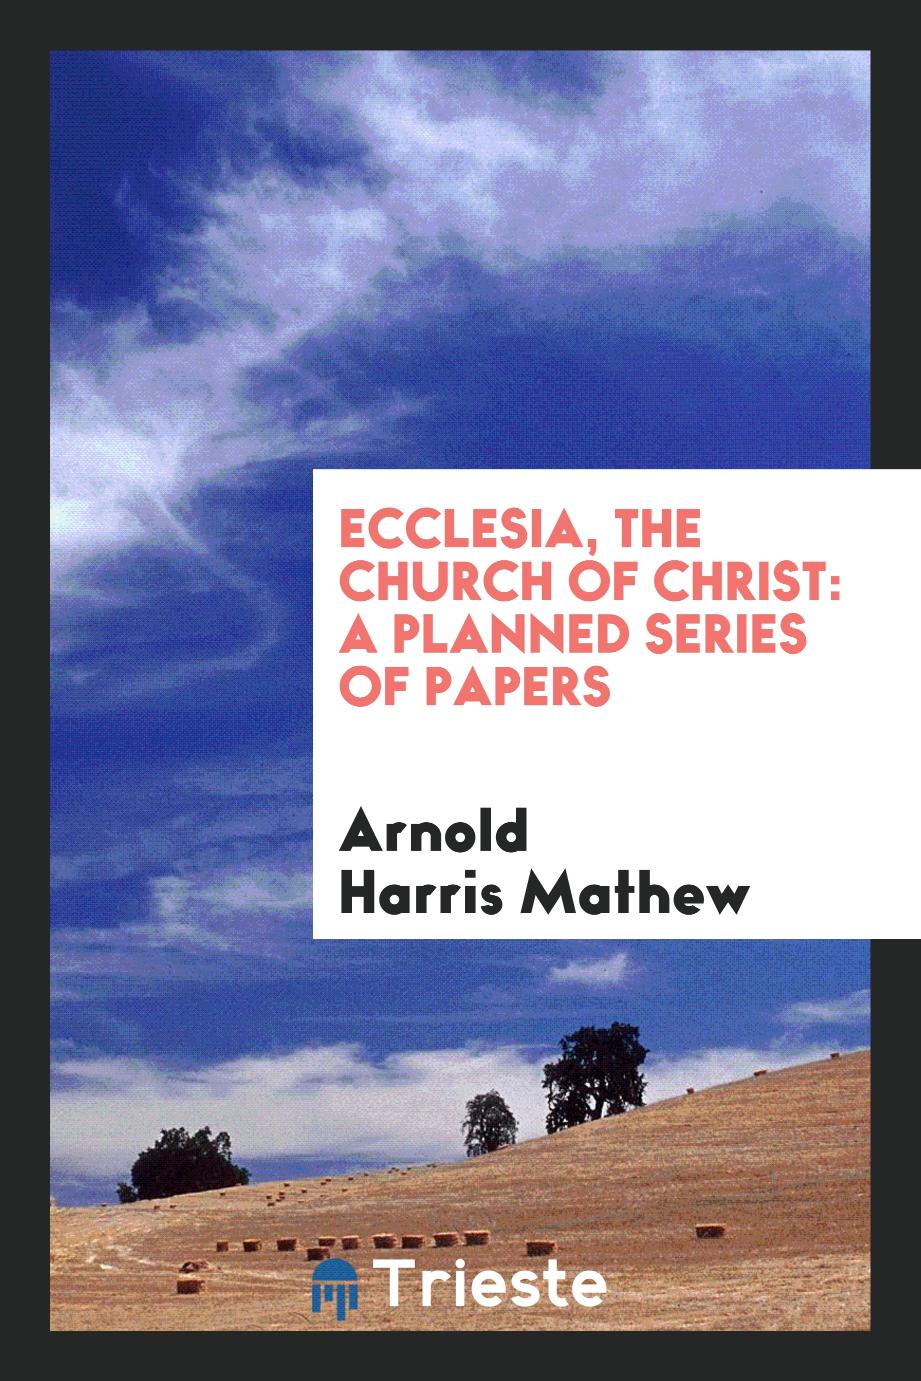 Ecclesia, the church of Christ: a planned series of papers